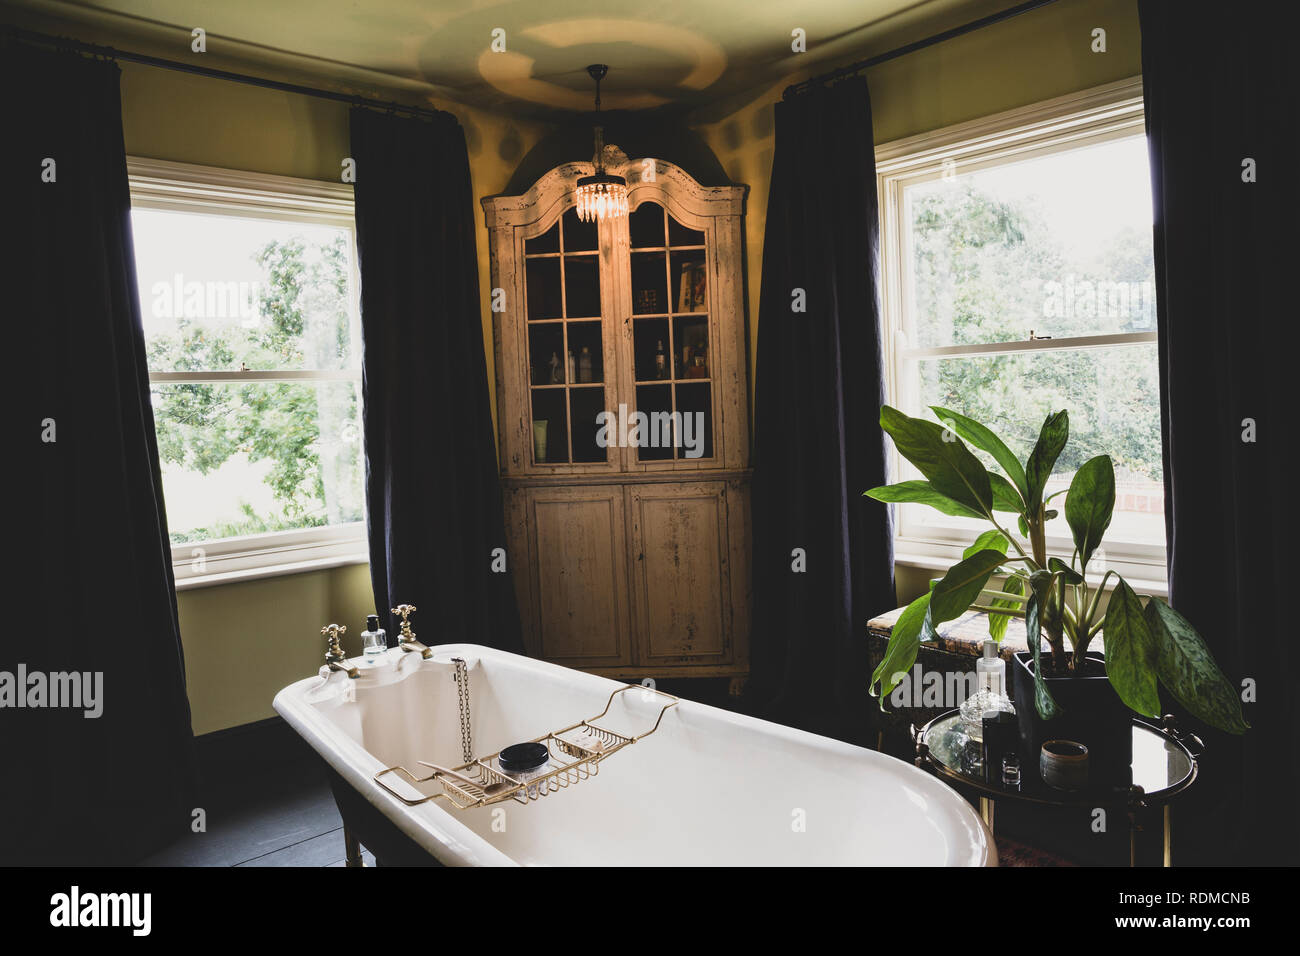 Interior view of bathroom with wooden corner cabinet  between sash windows, roll top bath with brass bath caddy. Stock Photo